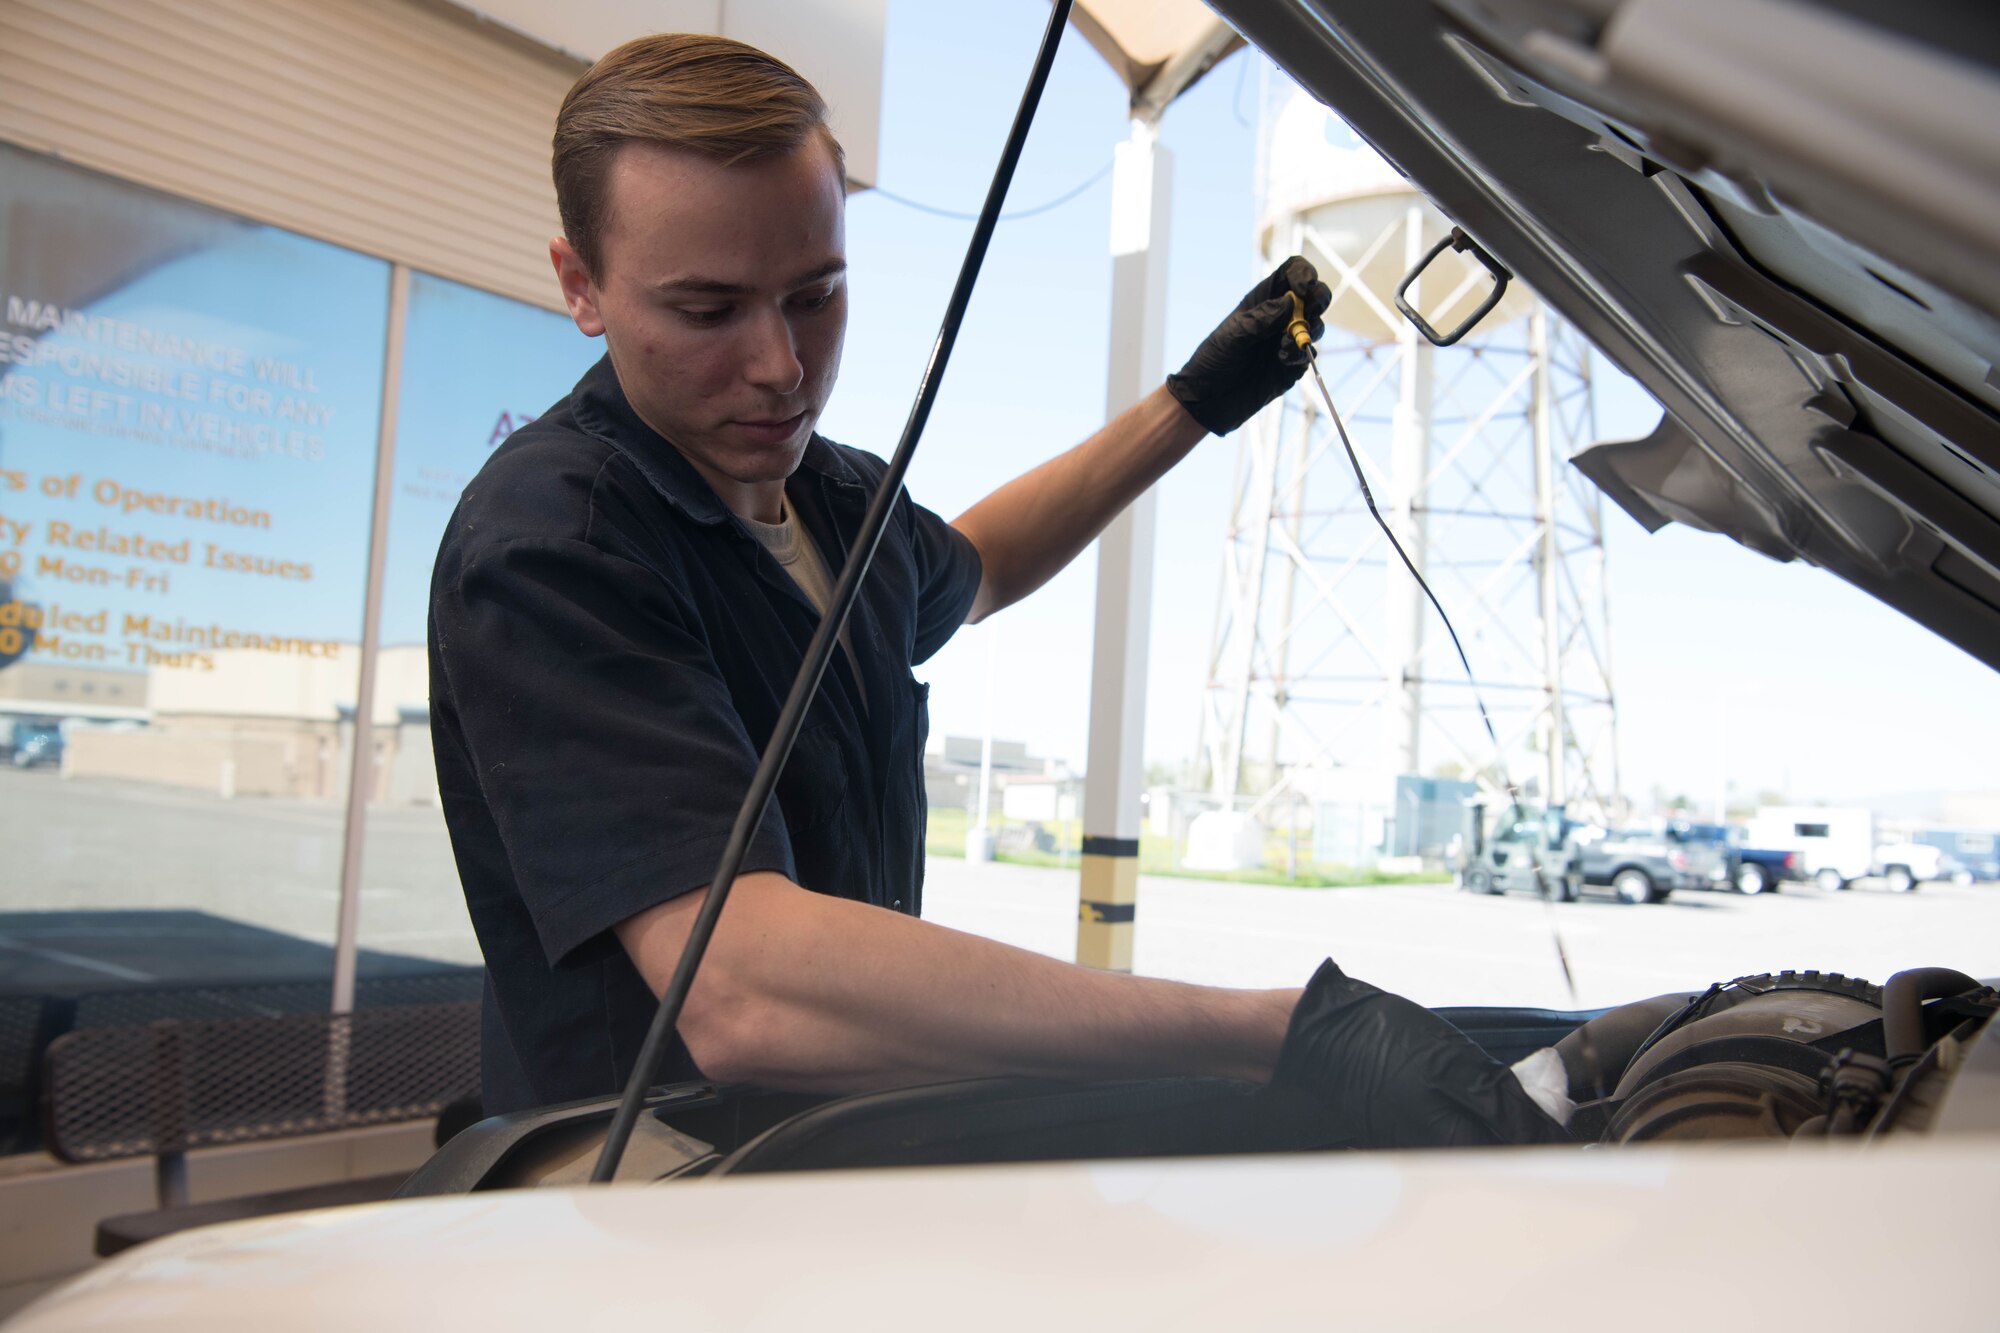 Vehicle Maintenance initiatives during COVID-19